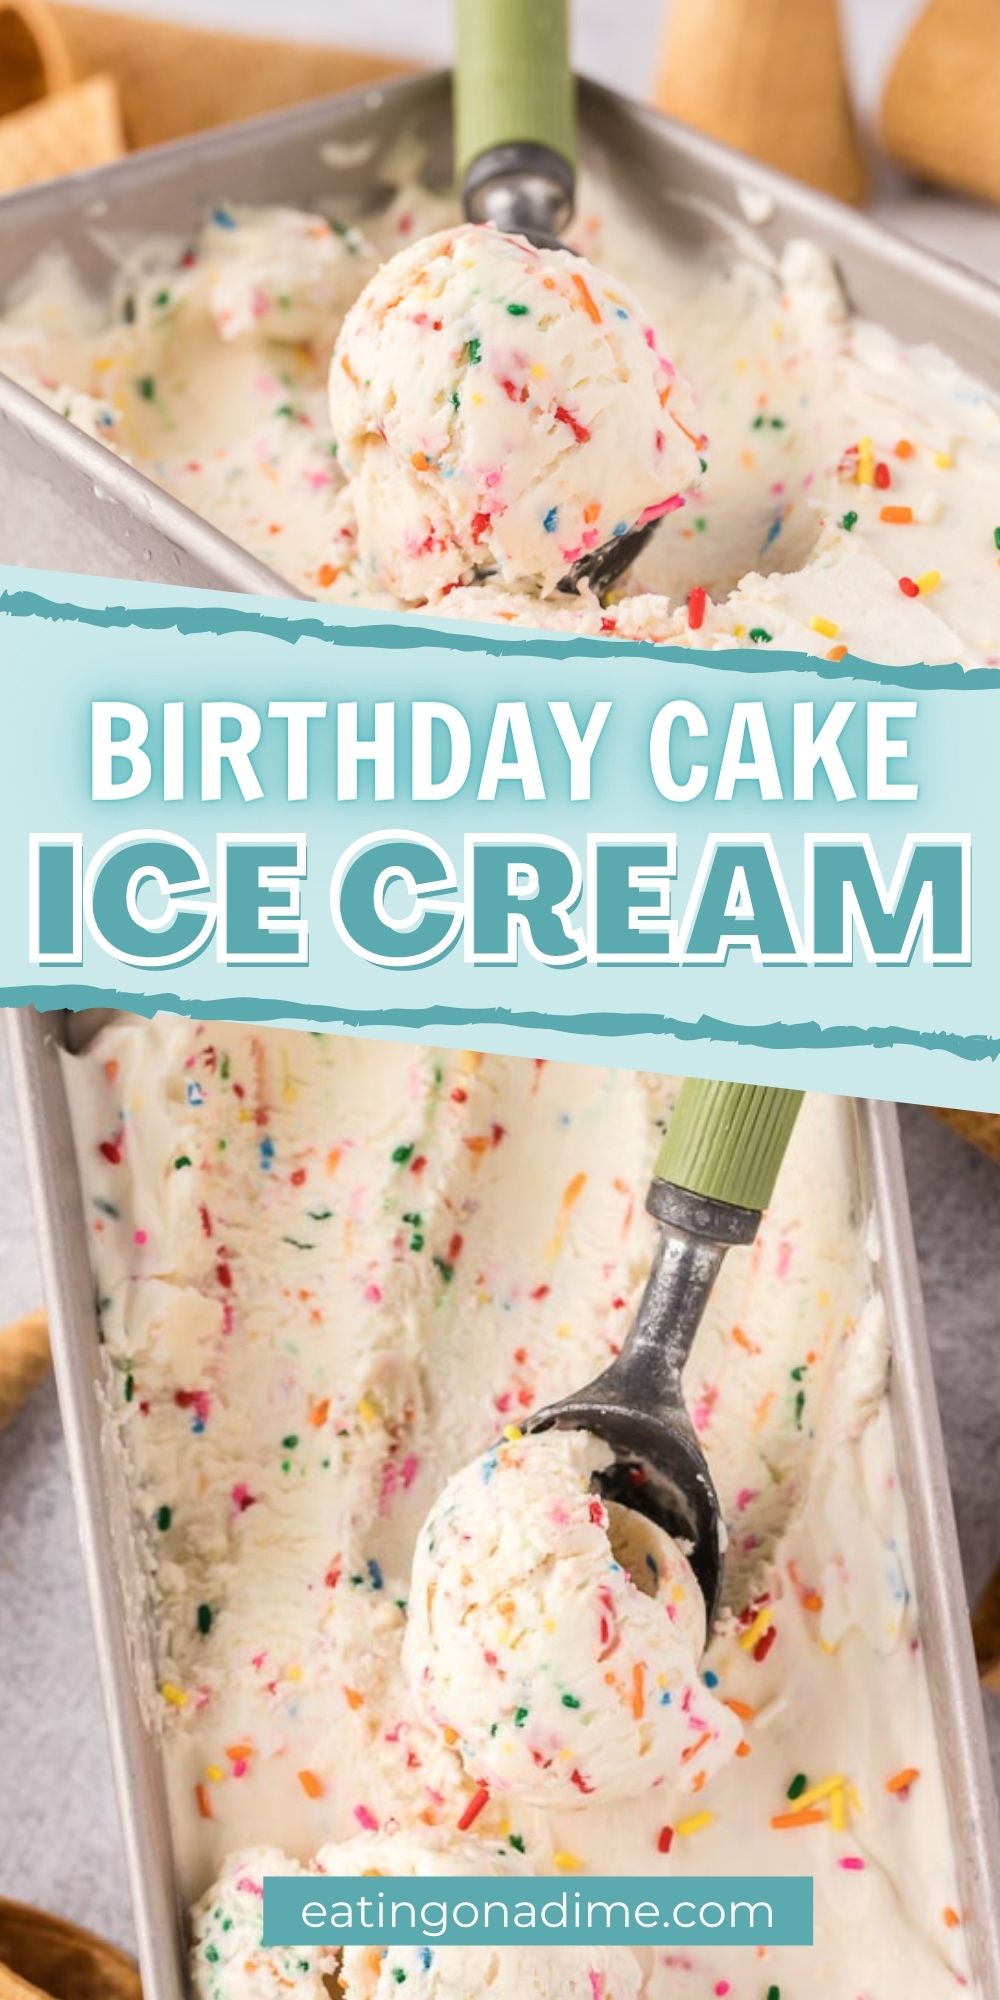 Birthday Cake Ice Cream is a delicious blend of cake batter flavored ice cream. The sprinkles make it special. This homemade no churn birthday cake ice cream is easy to make and everyone loves it too! #eatingonadime #icecreamrecipes #birthdaycakerecipes 
